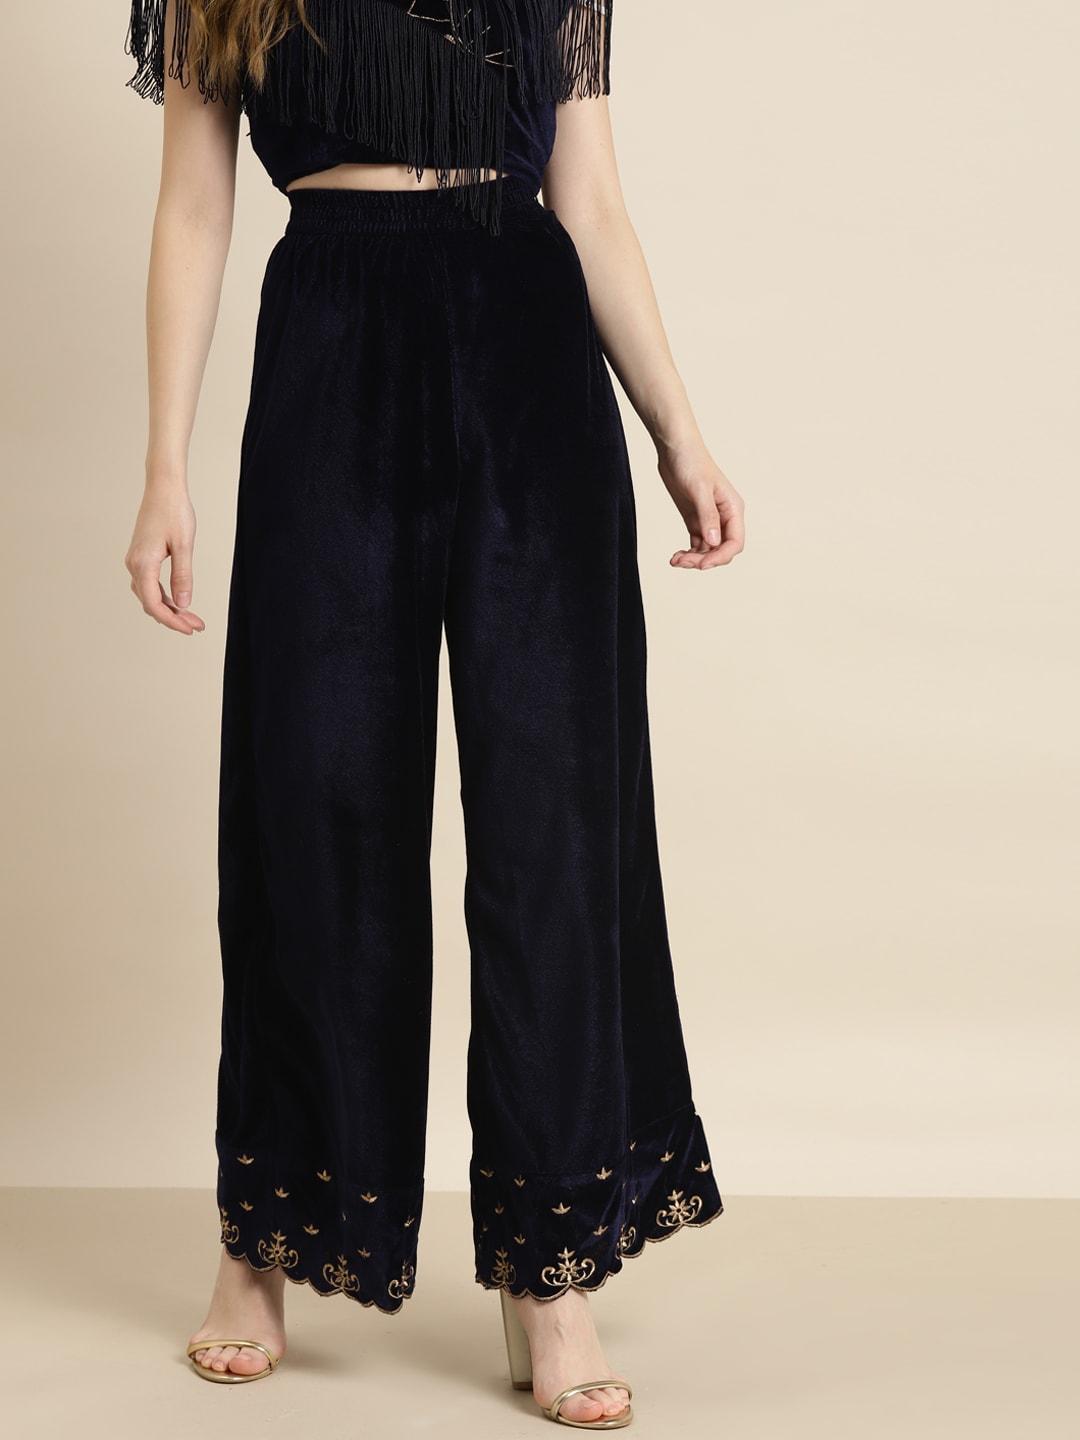 shae by sassafras women navy blue embroidered parallel trousers